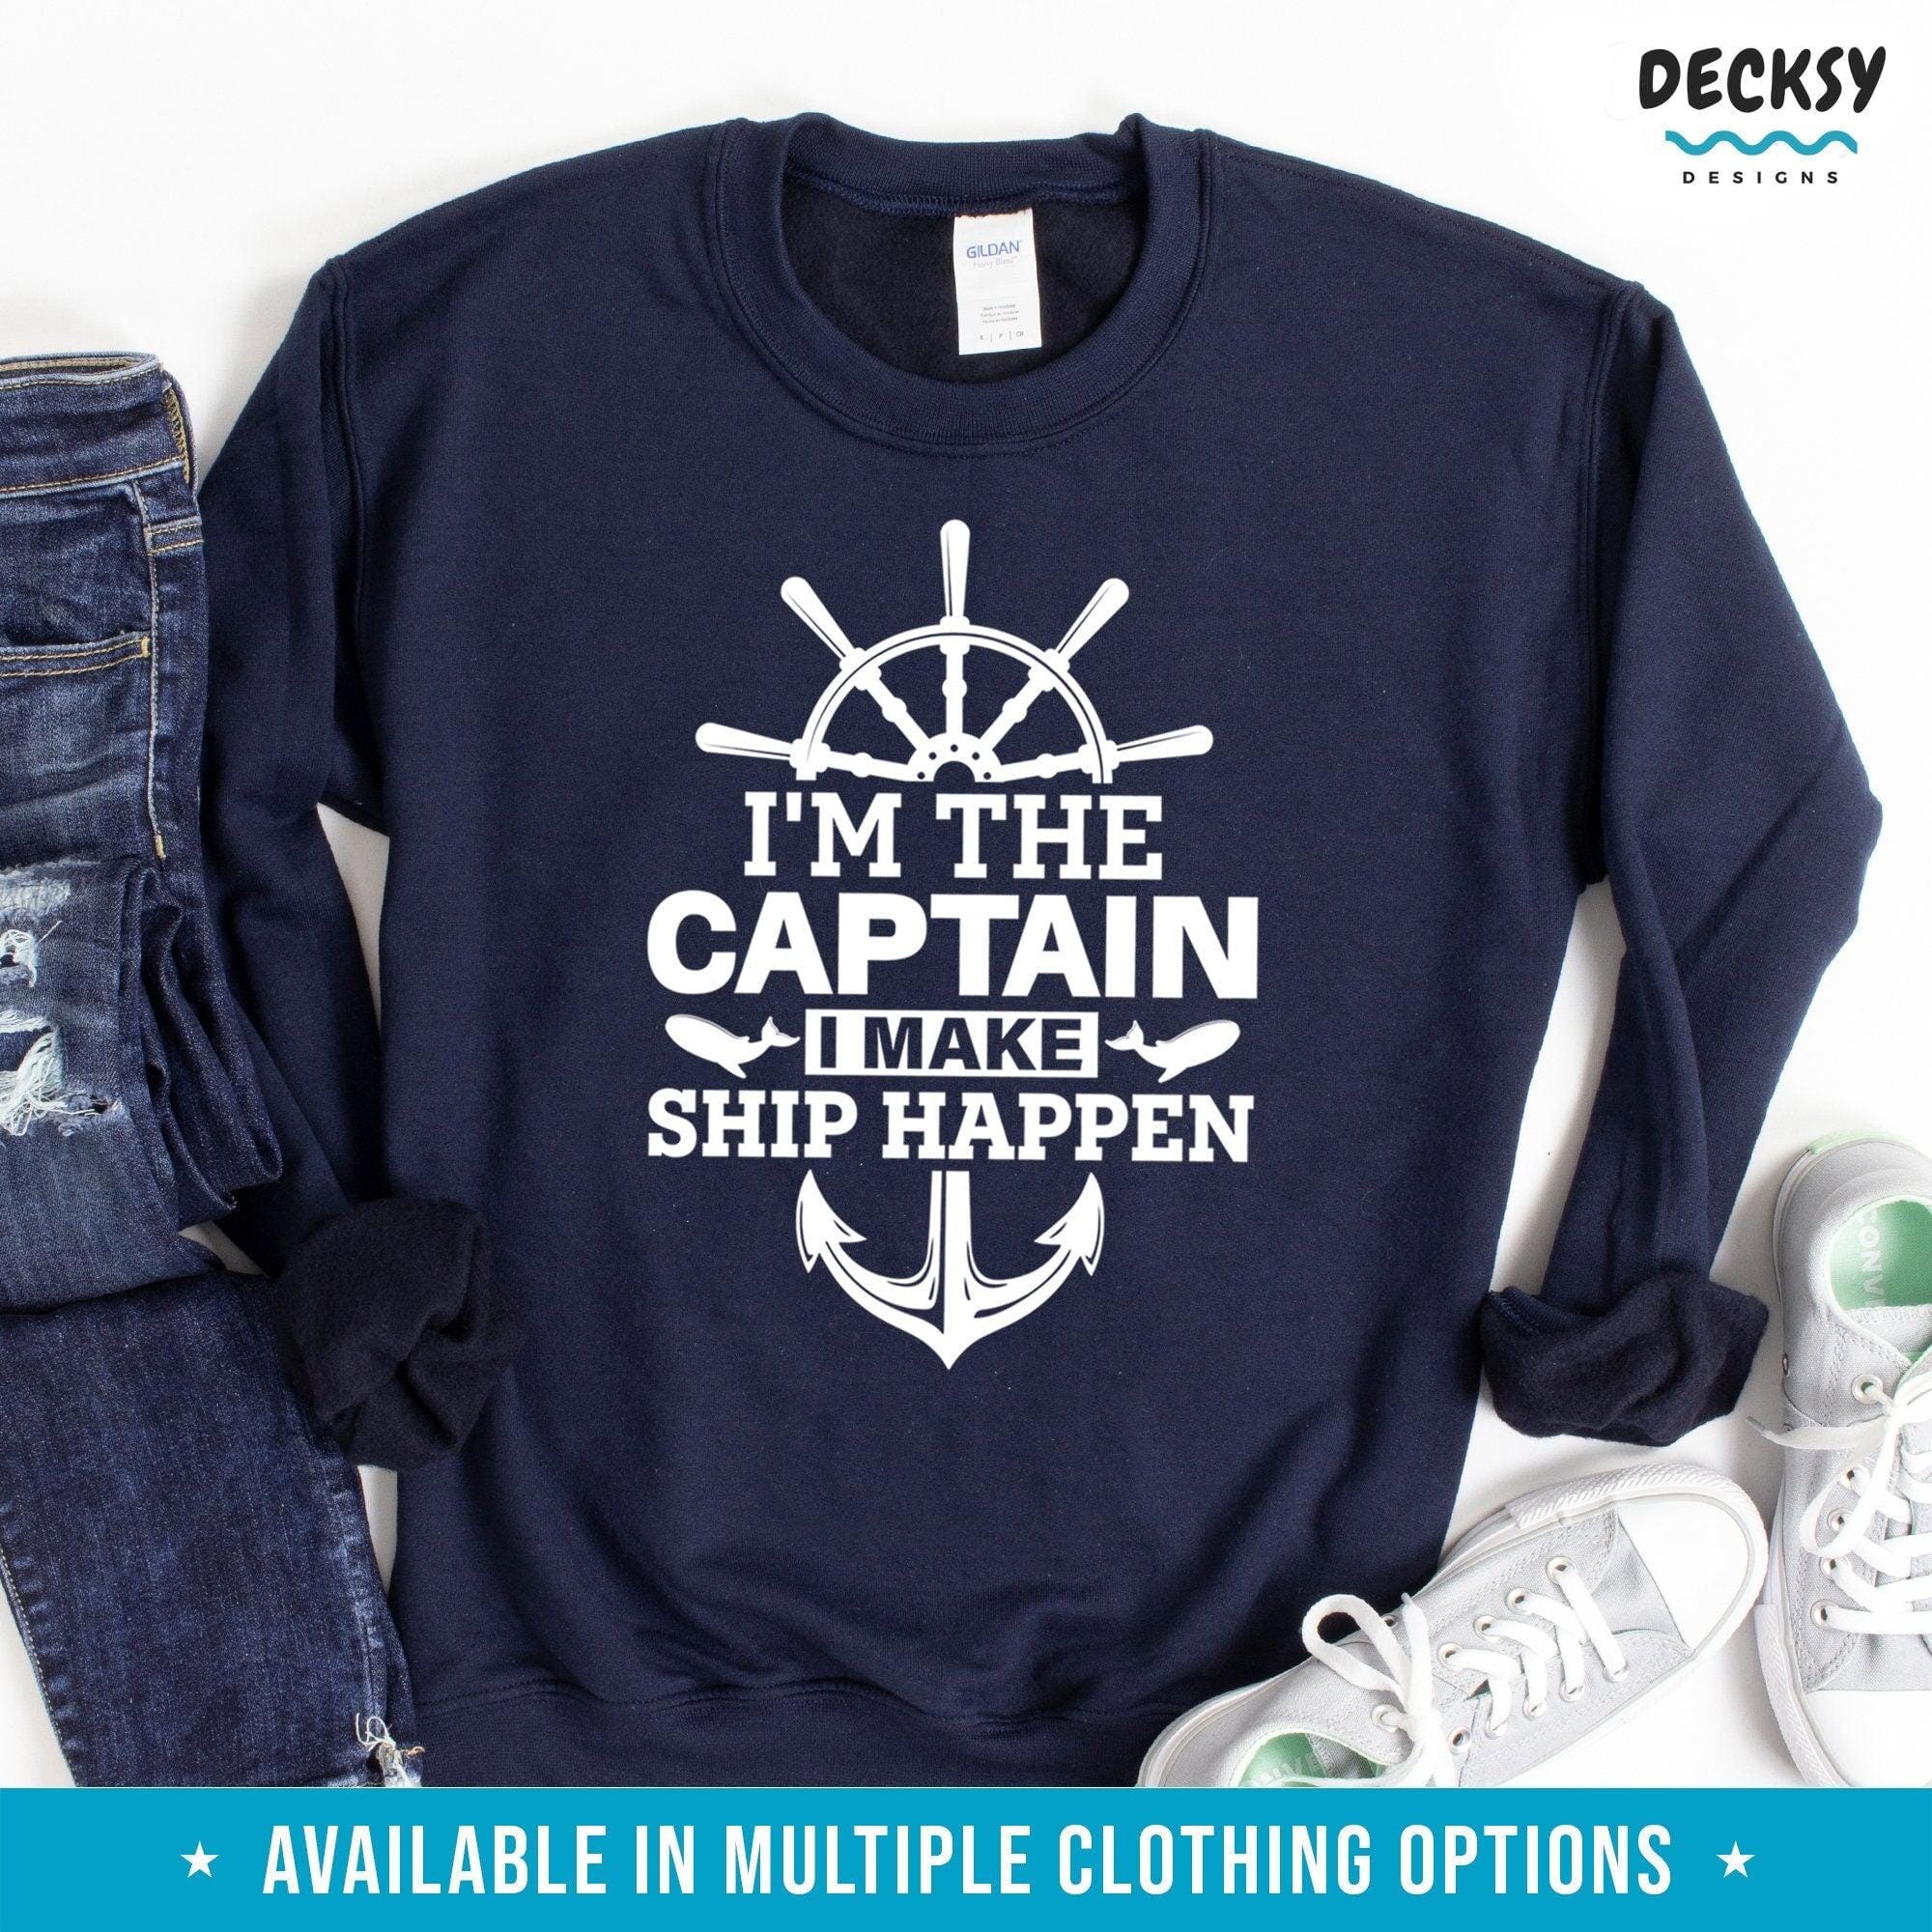 Captain Shirt, Ship Captain Gift-Clothing:Gender-Neutral Adult Clothing:Tops & Tees:T-shirts:Graphic Tees-DecksyDesigns